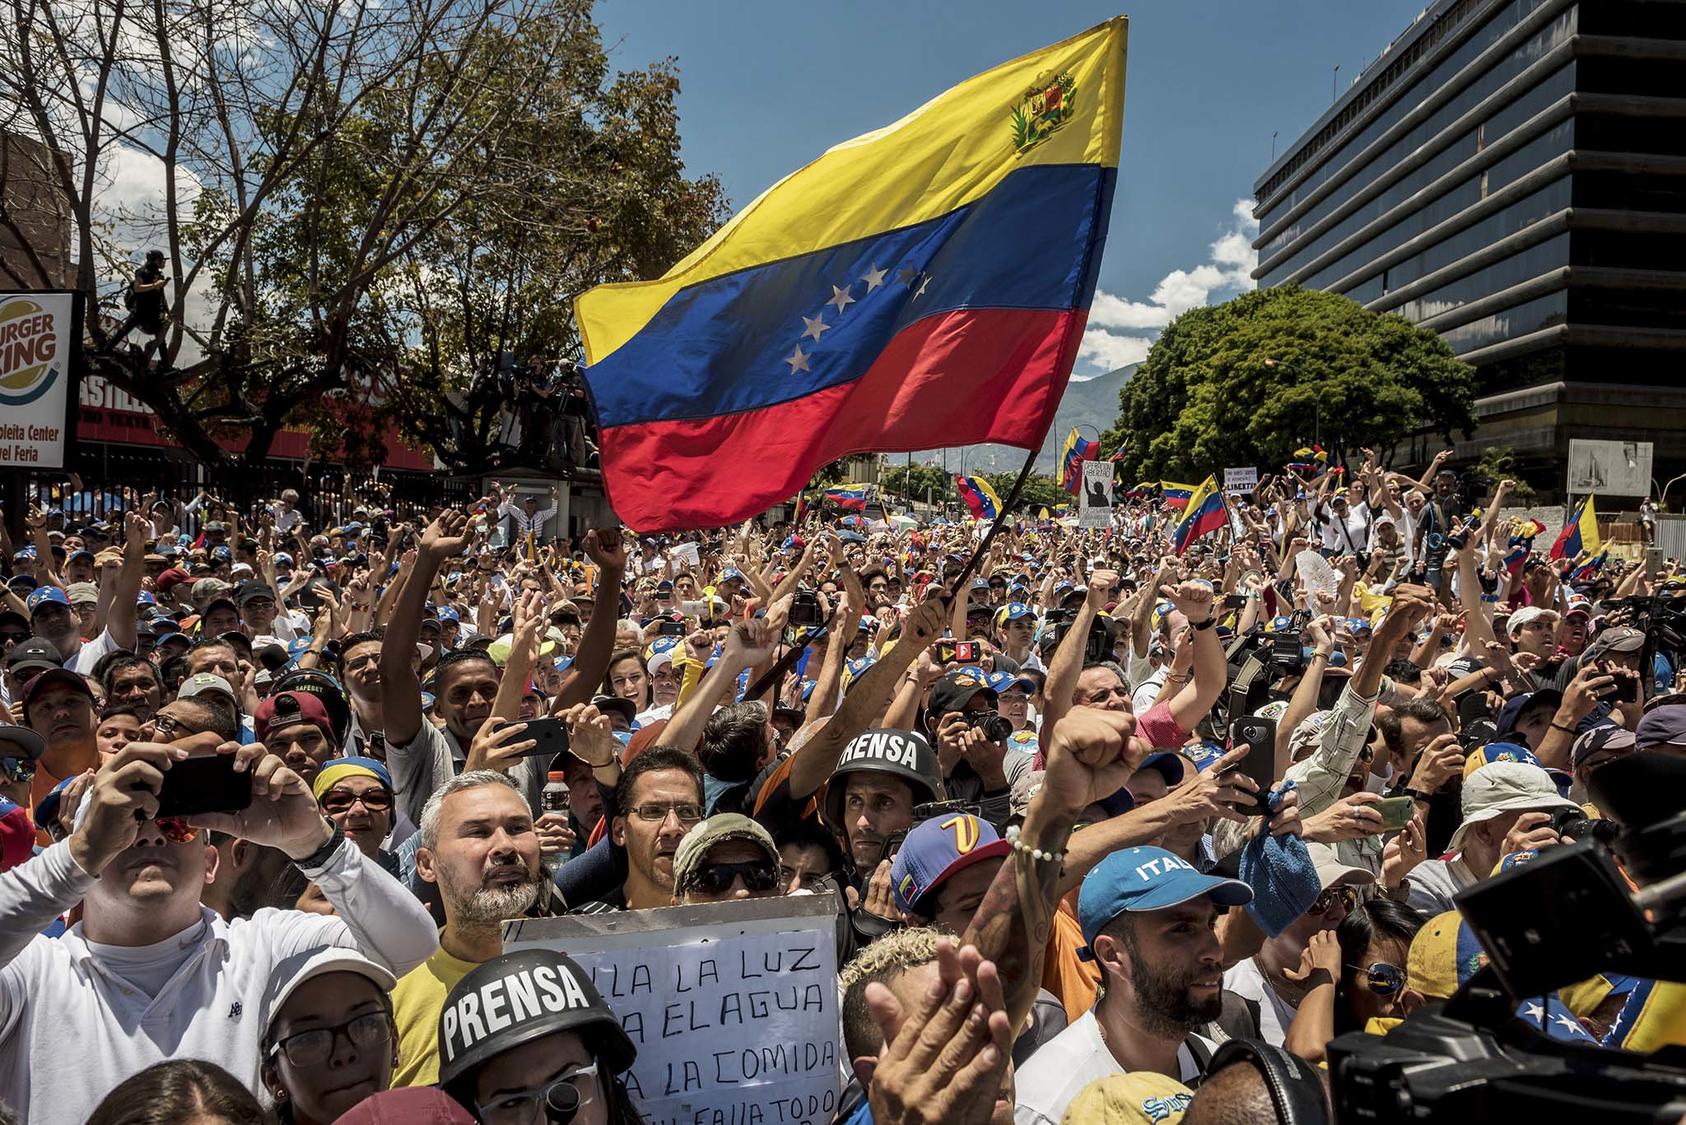 Opposition supporters watch Juan Guaidó, the Venezuelan opposition leader, speak out against Presidebt Nicolas Maduro in Caracas, April 6, 2019.